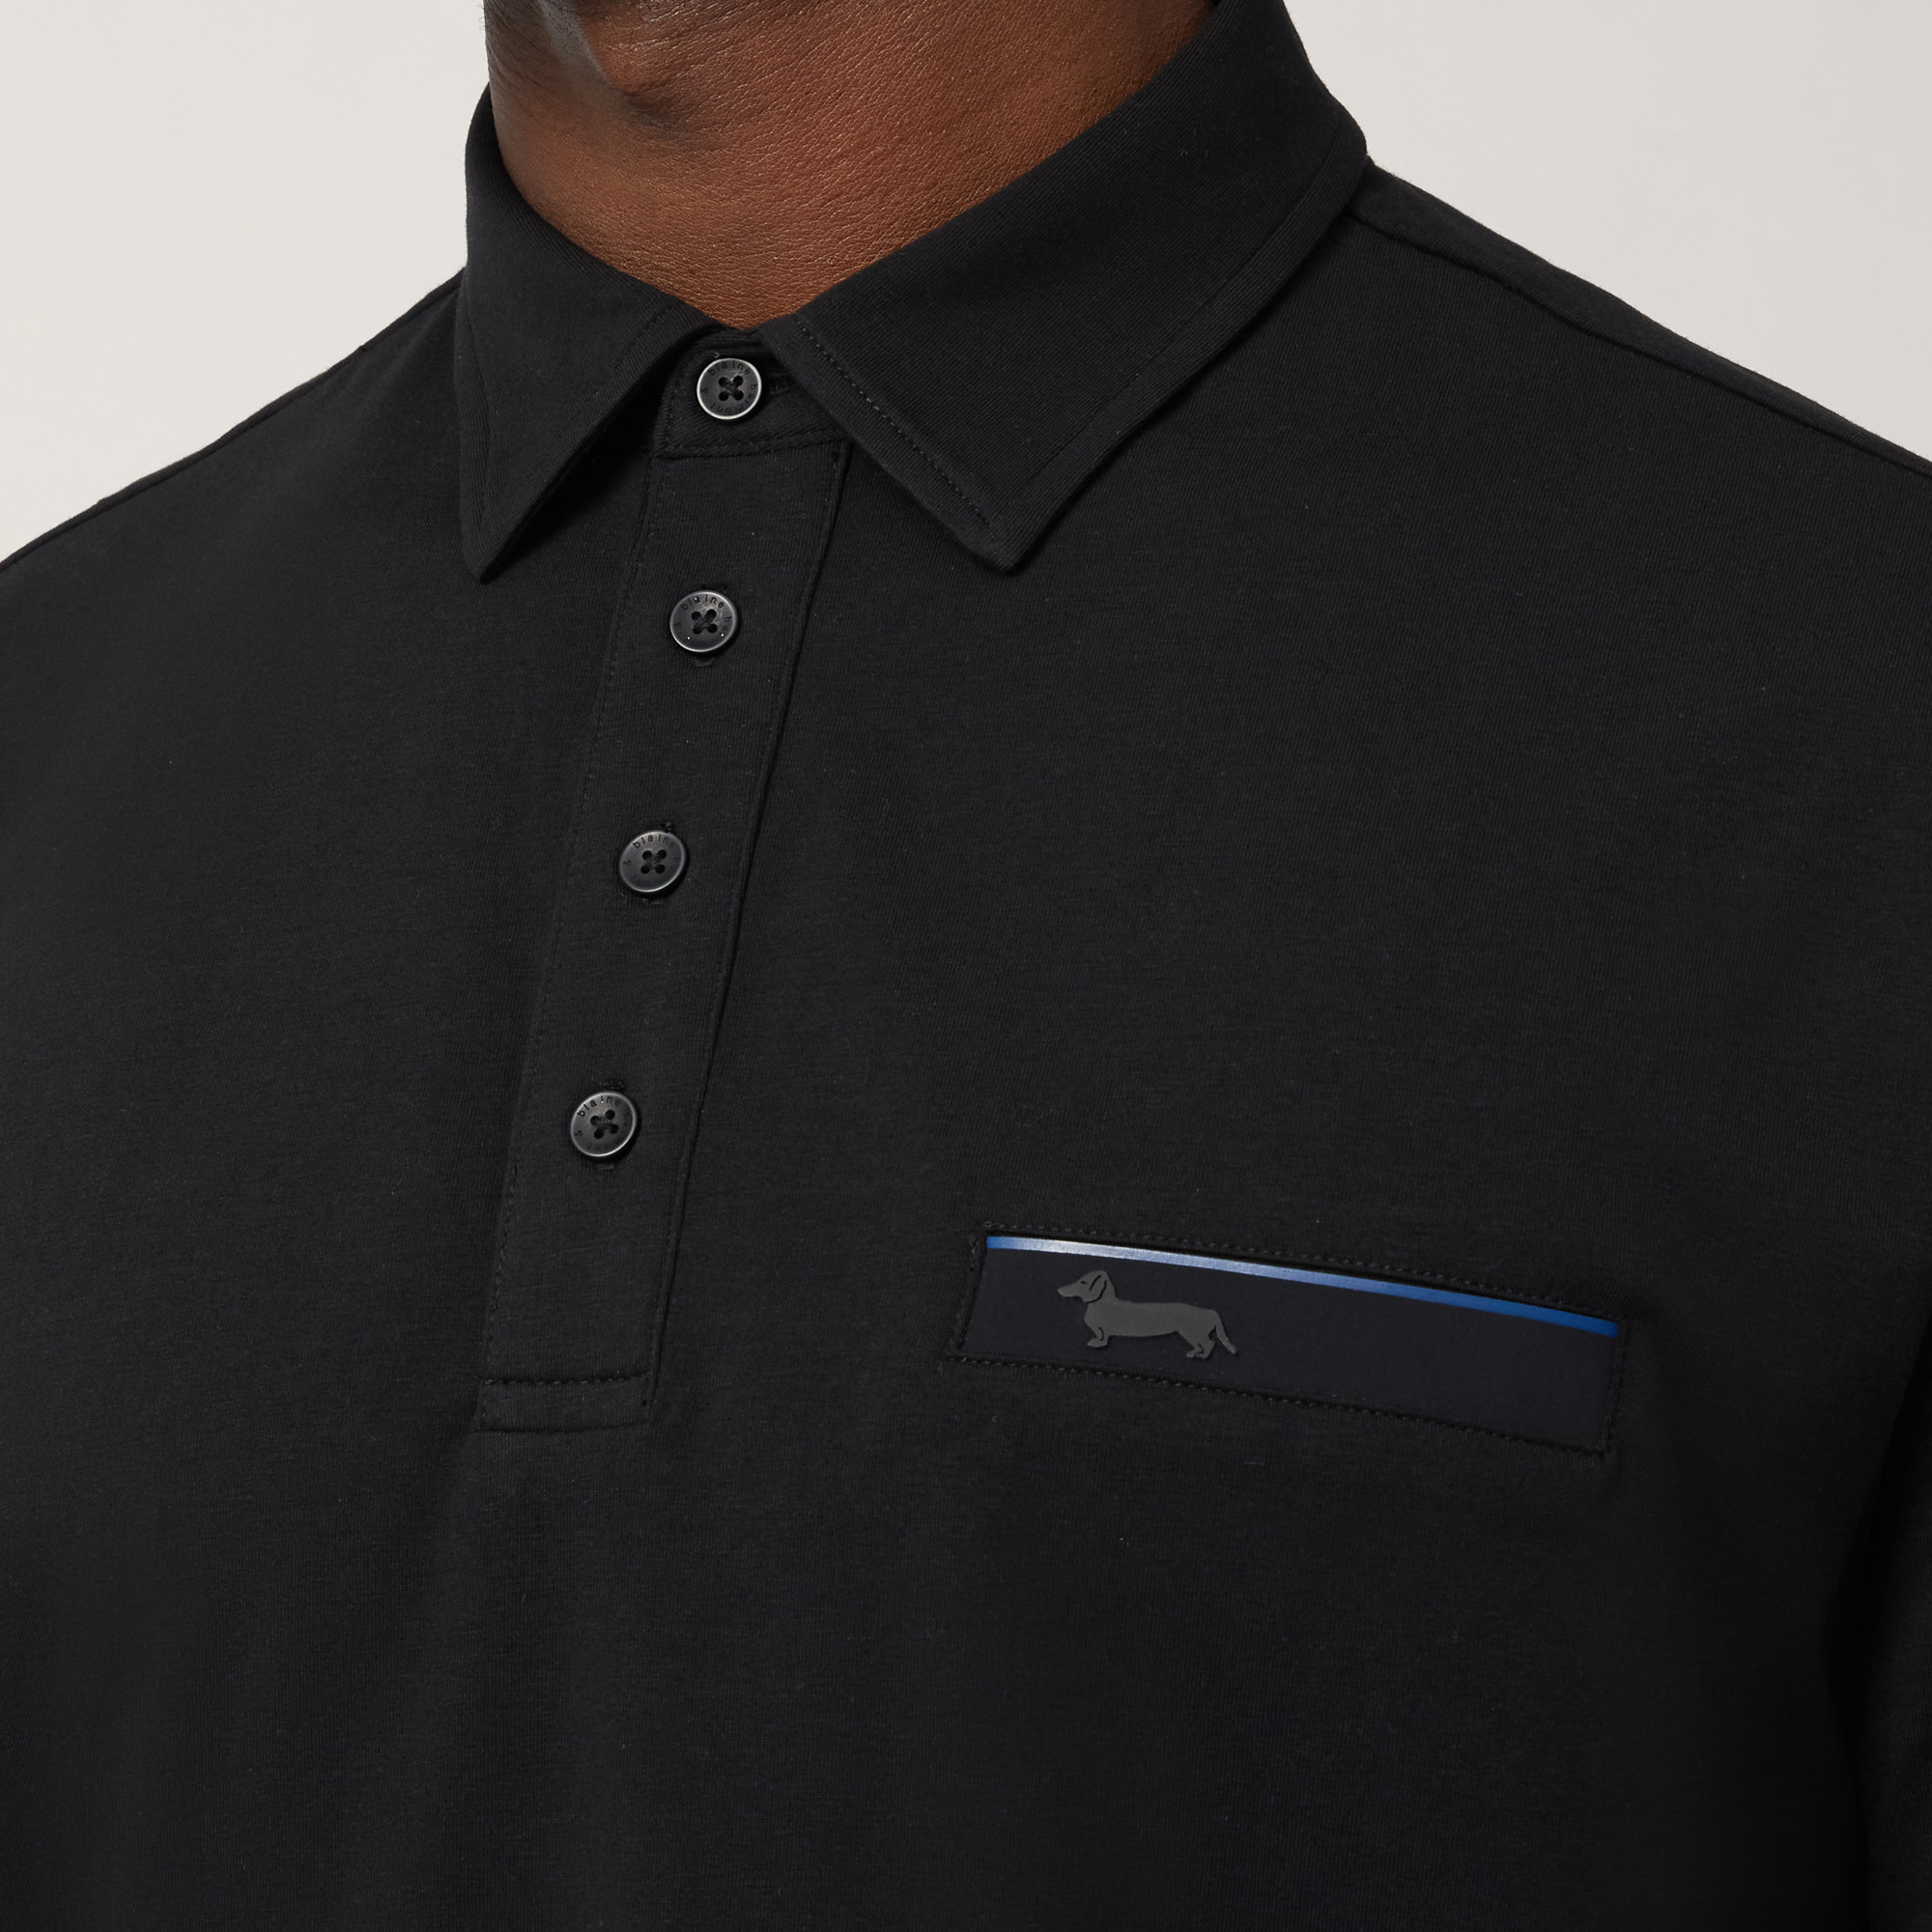 Polo with Pocket, Black, large image number 2